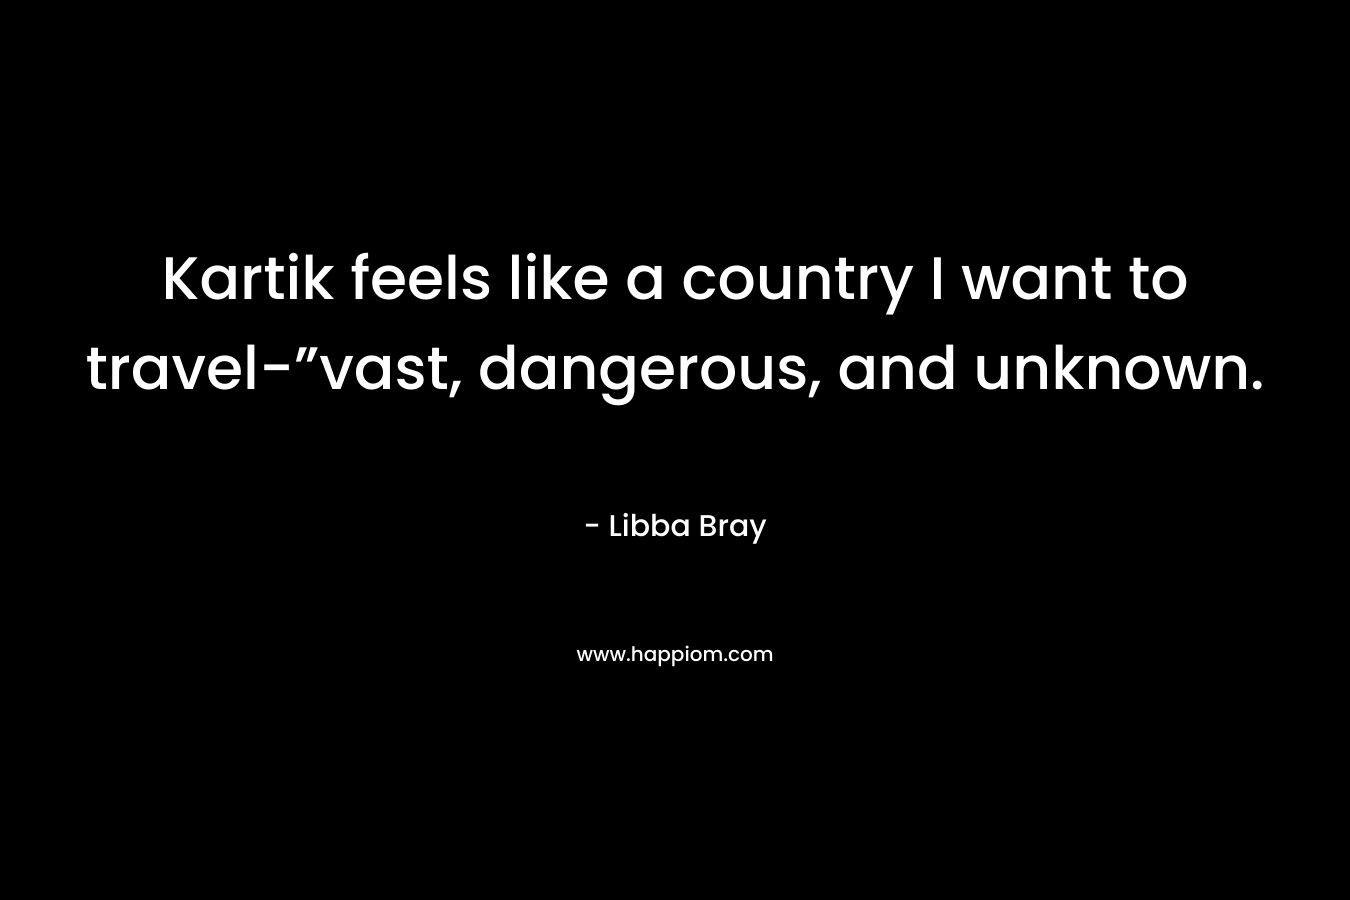 Kartik feels like a country I want to travel-”vast, dangerous, and unknown. – Libba Bray